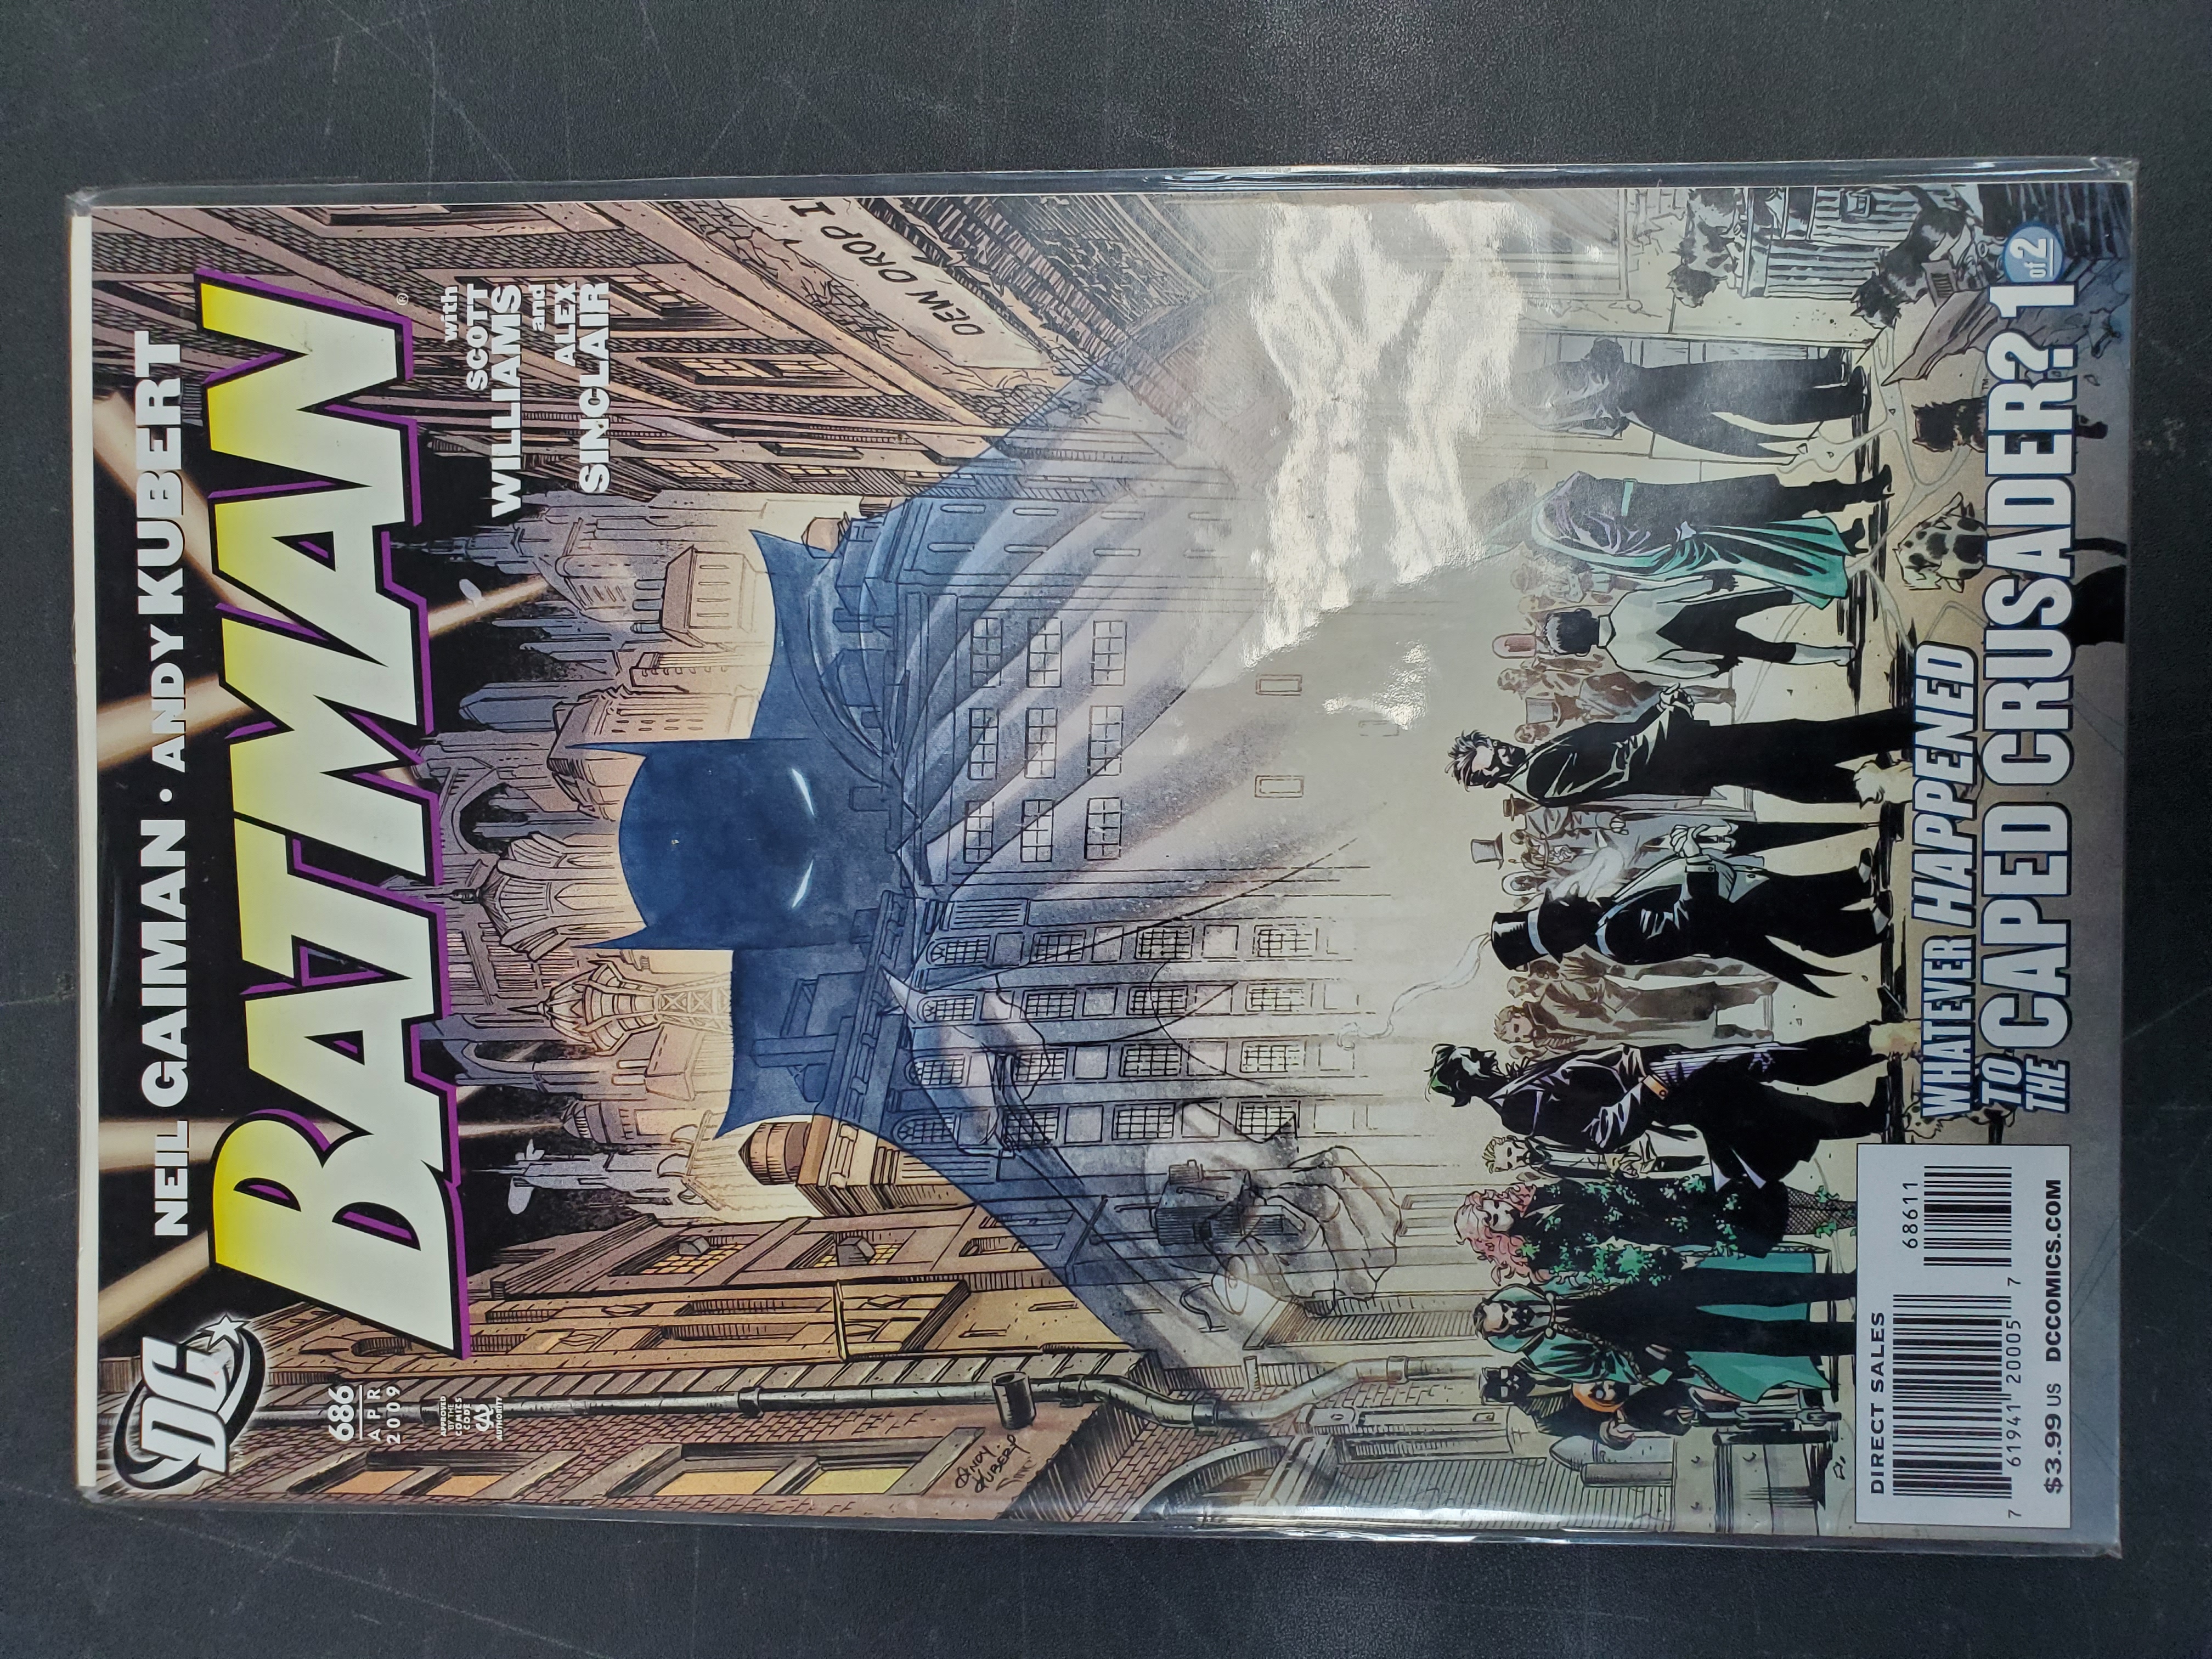 Batman Whatever Happened To The Caped Crusader #1-2 (DC 2009) Set